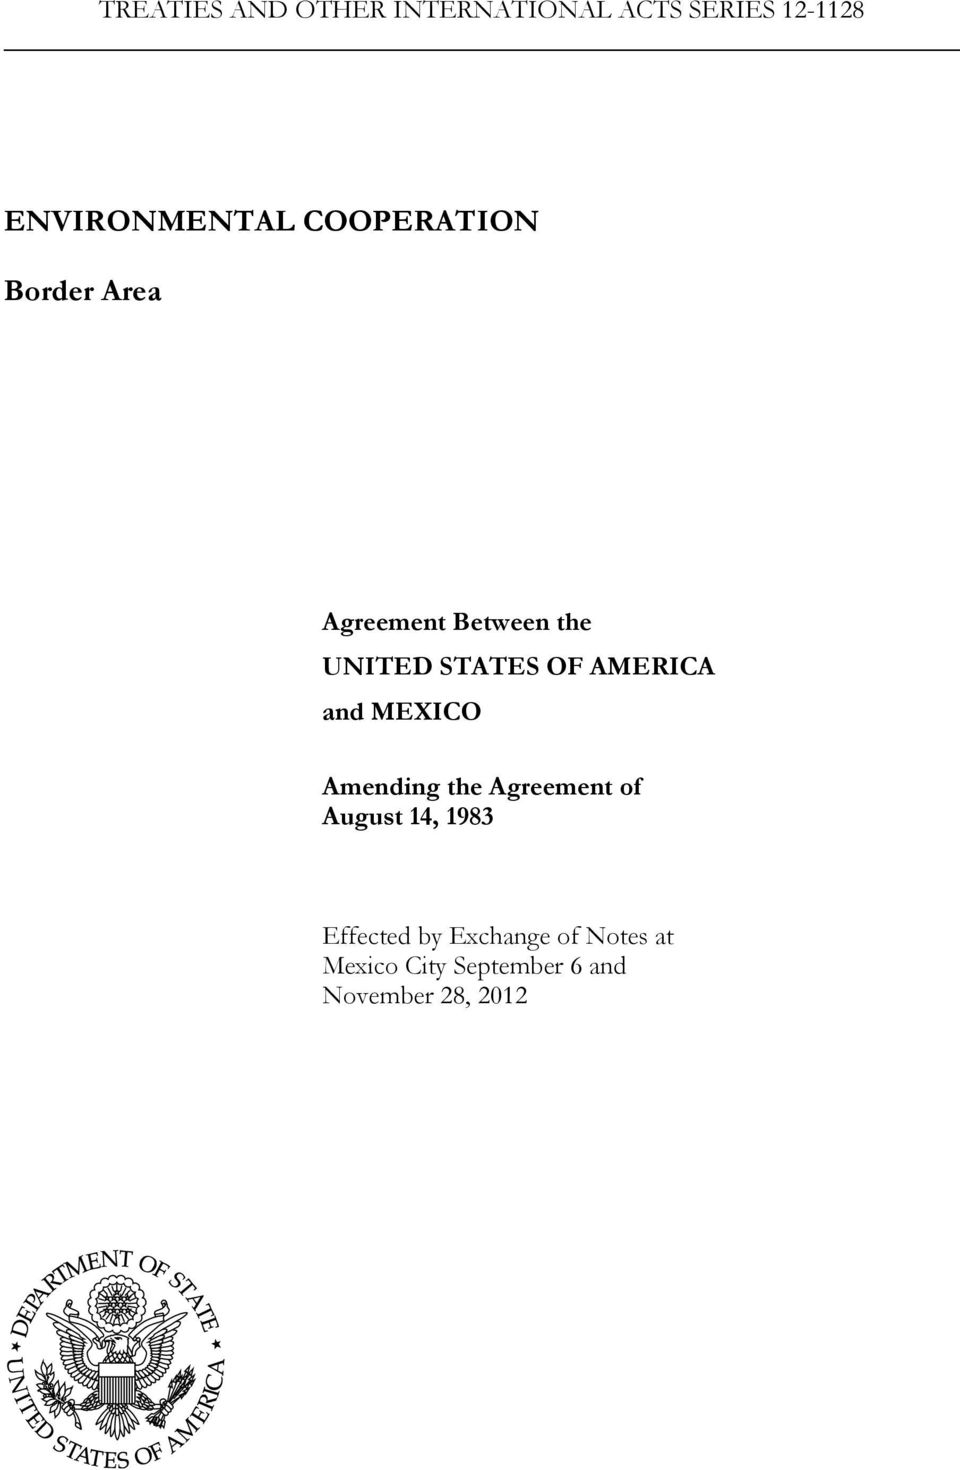 AMERICA and MEXICO Amending the Agreement of August 14, 1983